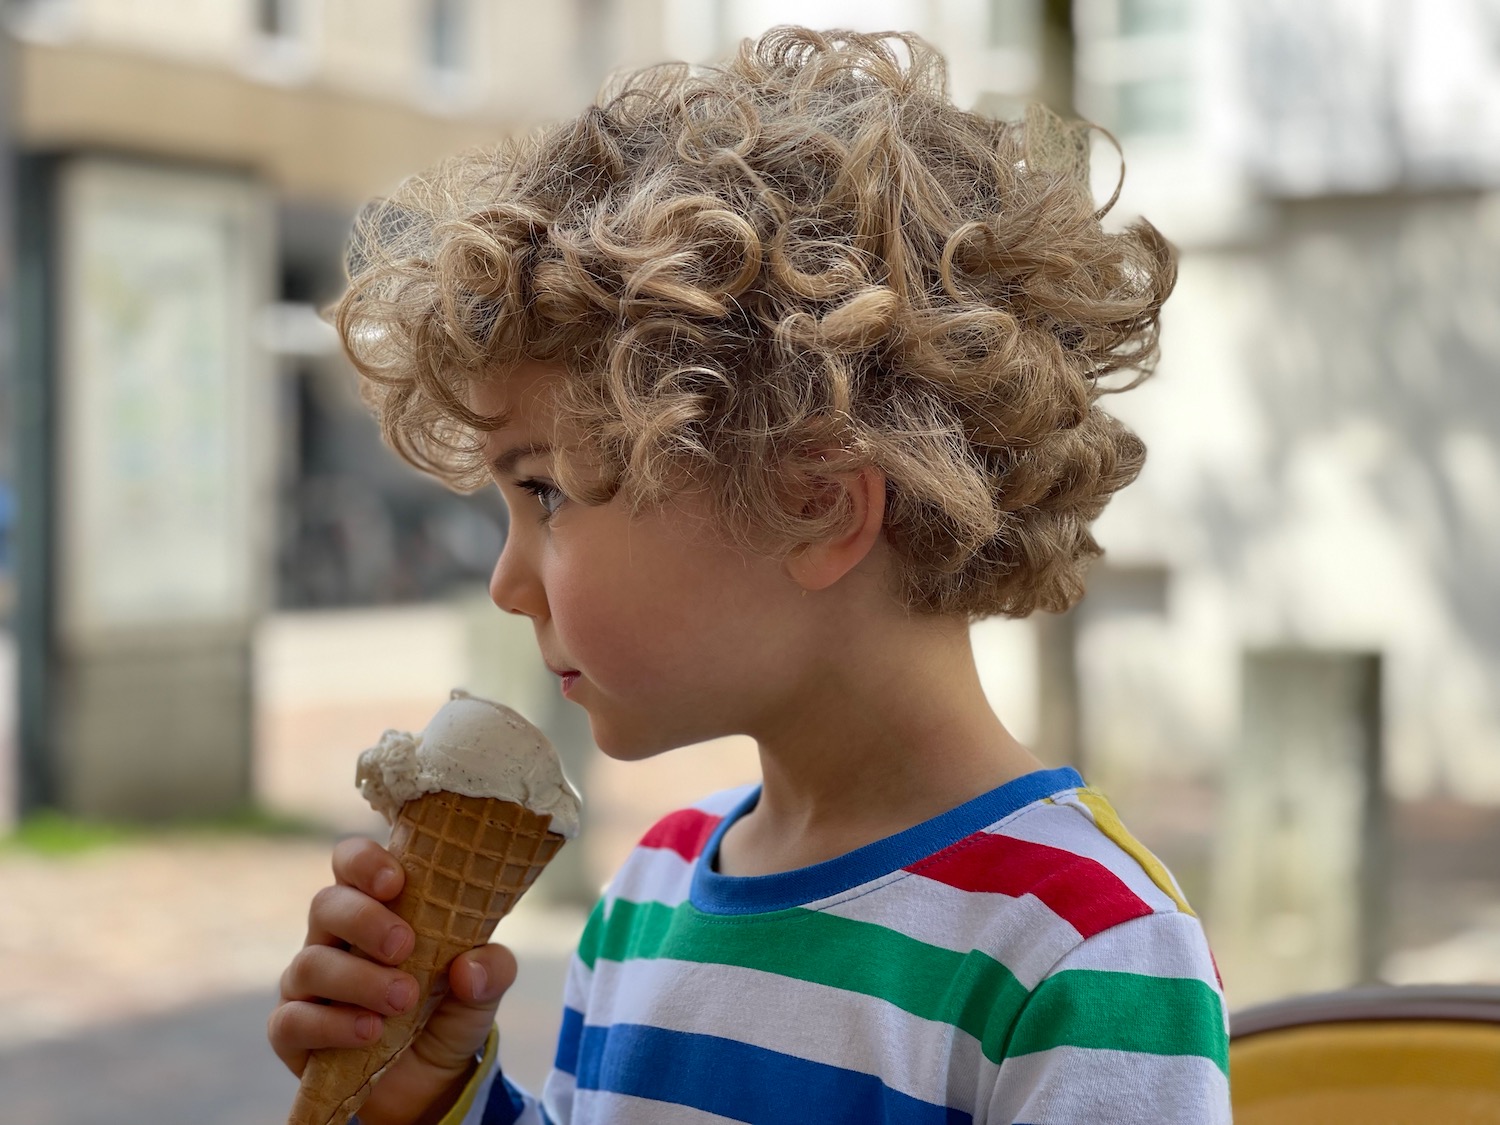 a child eating an ice cream cone